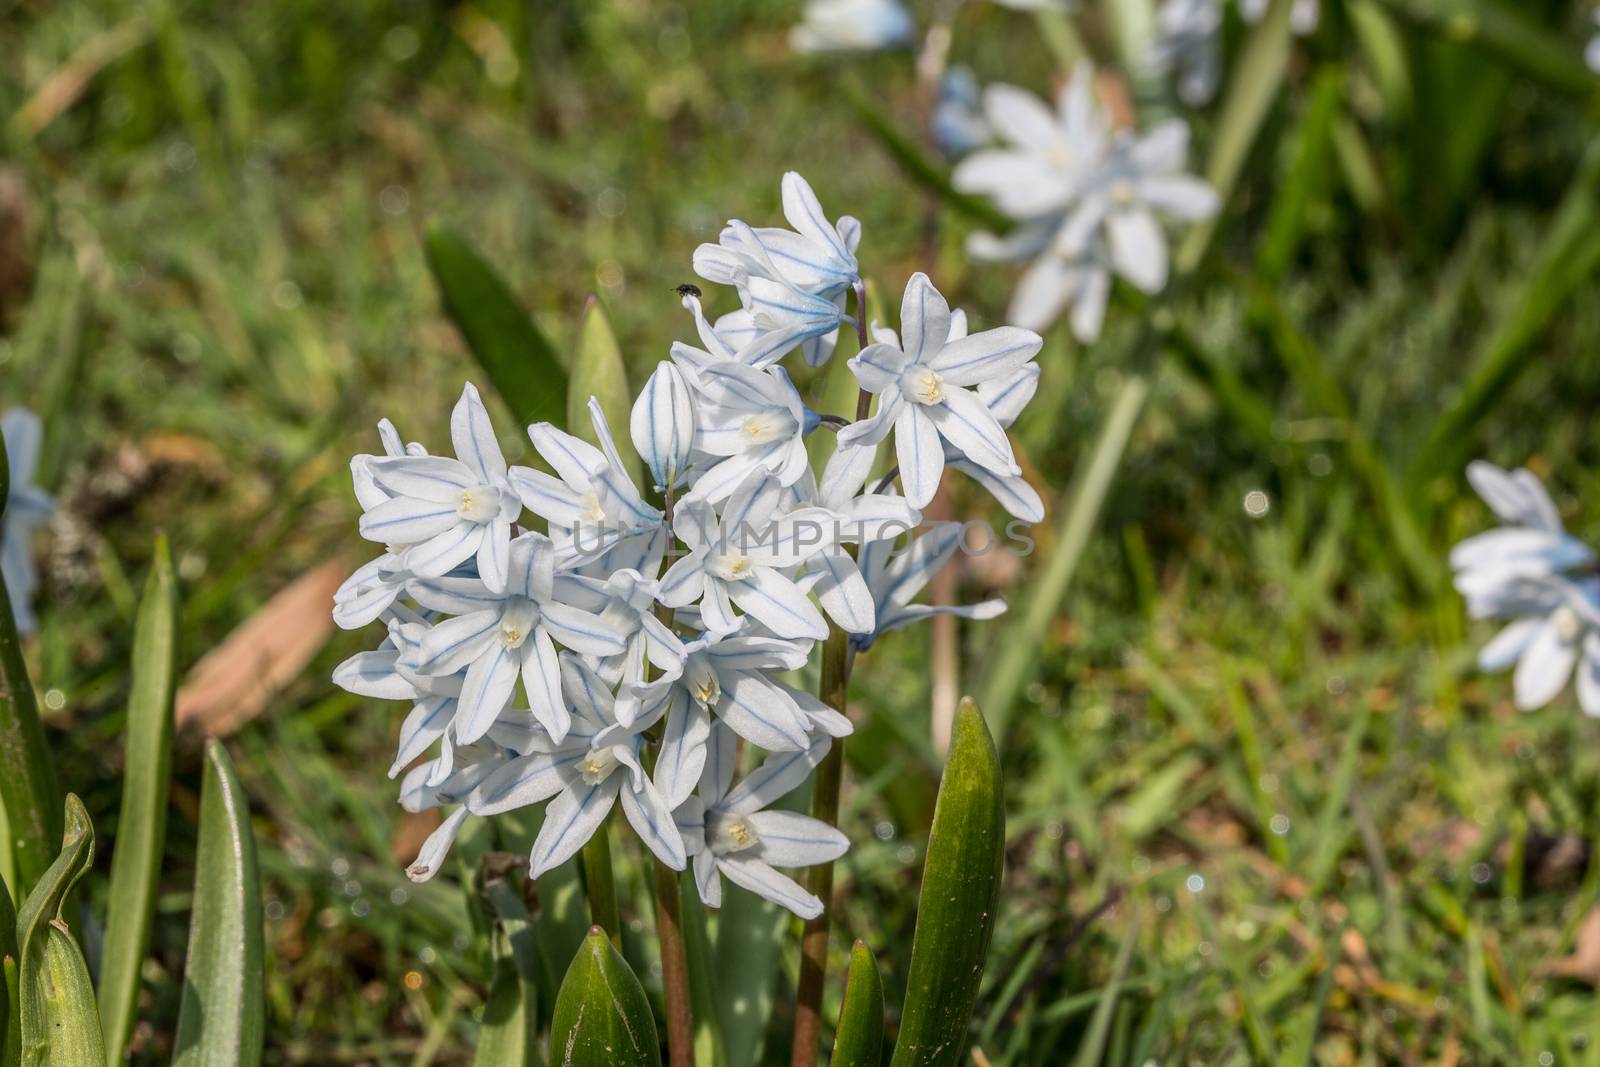 Umbel milk star with white flowers in the park